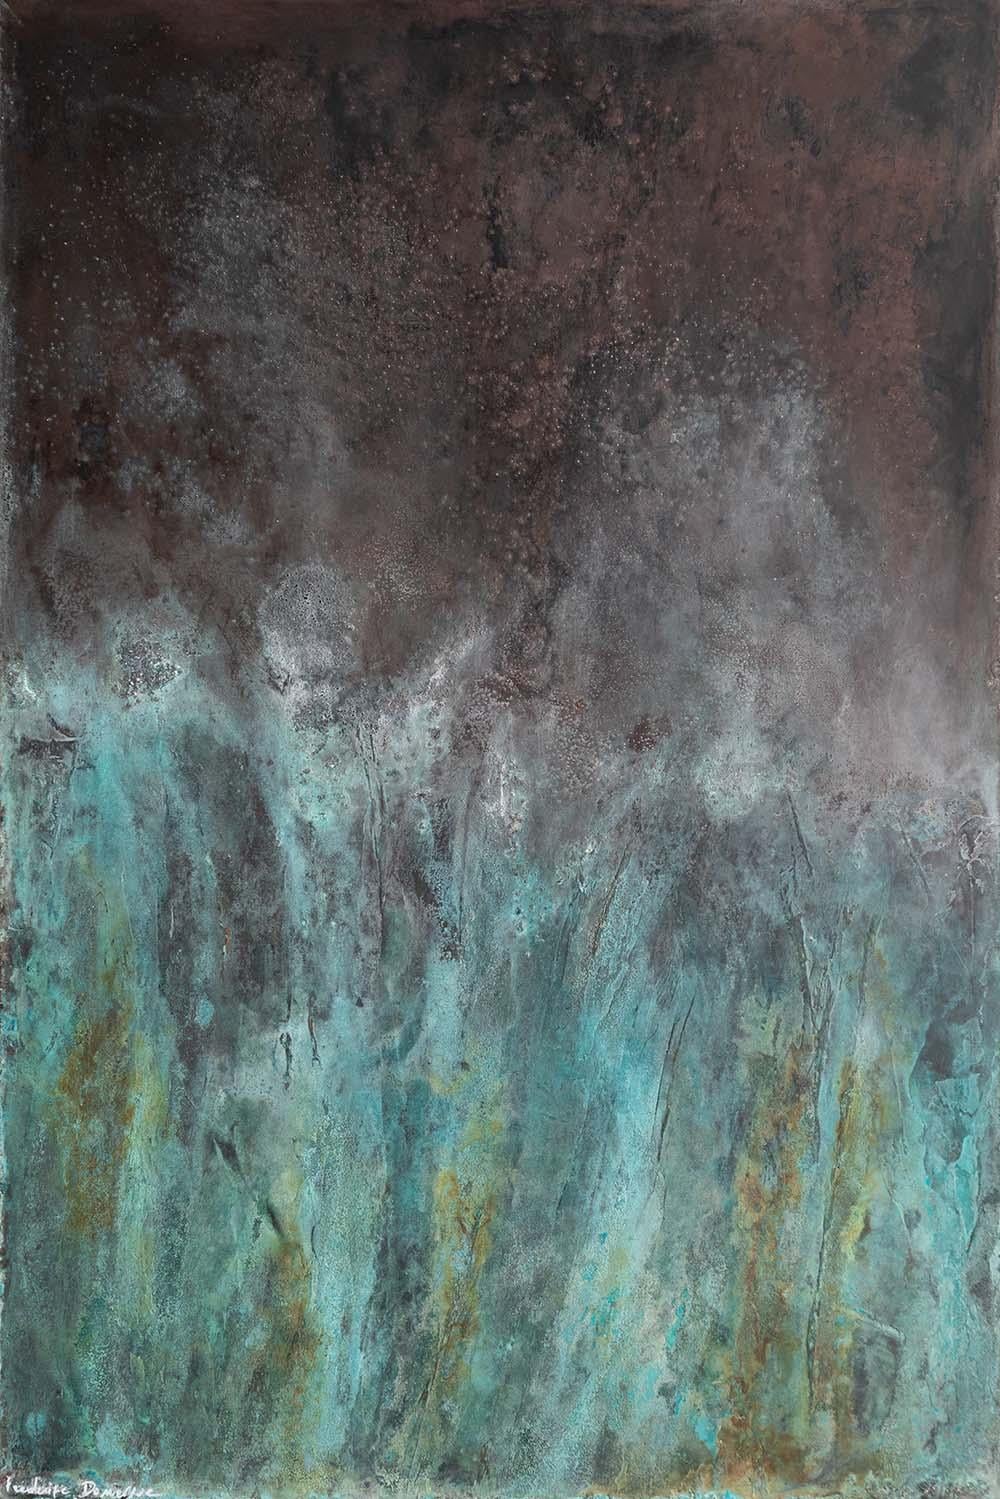 Abyss is a unique painting by French contemporary artist Frédérique Domergue. This painting is made with oxidized zinc and bronze leaves on aluminum, patina fixed with beeswax, dimensions are 150 x 100 cm (59.1 × 39.4 in).
The artwork is signed,